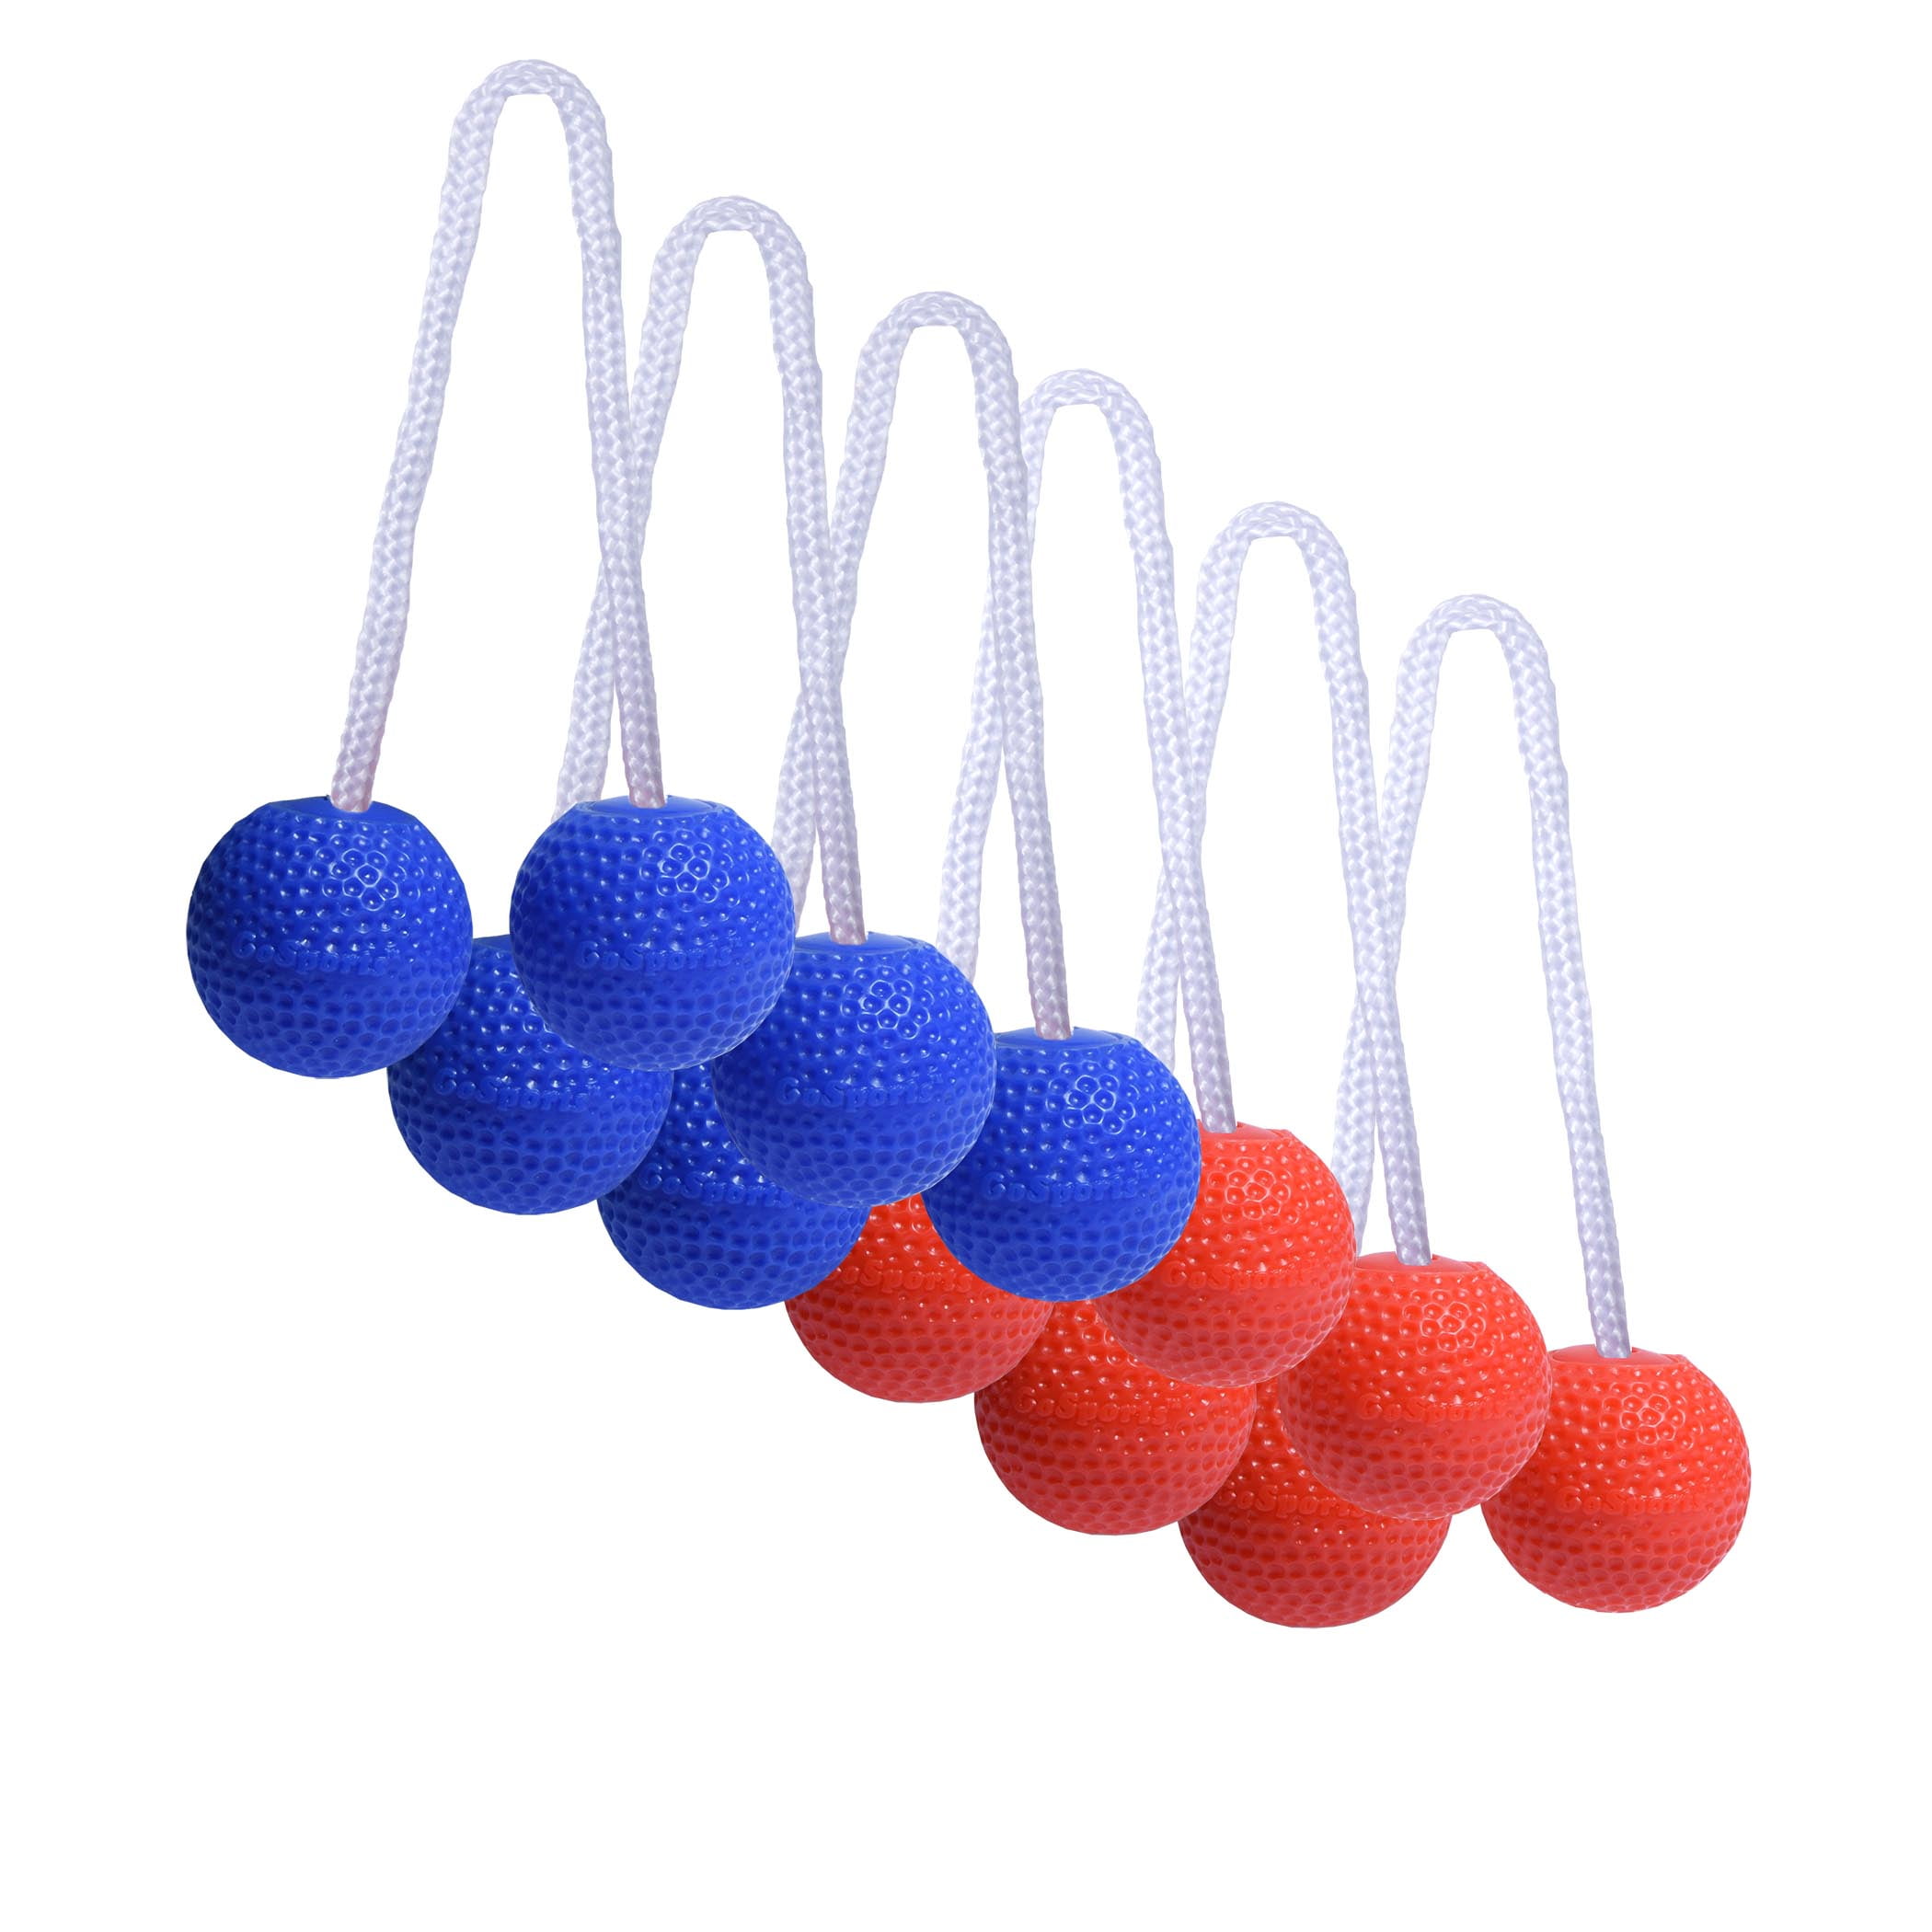 4 Packs Sports Replacement Ladderball Bolas Outdoor Ladder Ball Safe Ladder Ball Game Set Ladder Ball Replacement Balls Replacement Bolas Ladder Toss Bola Replacement Set for Kids Adults Family 